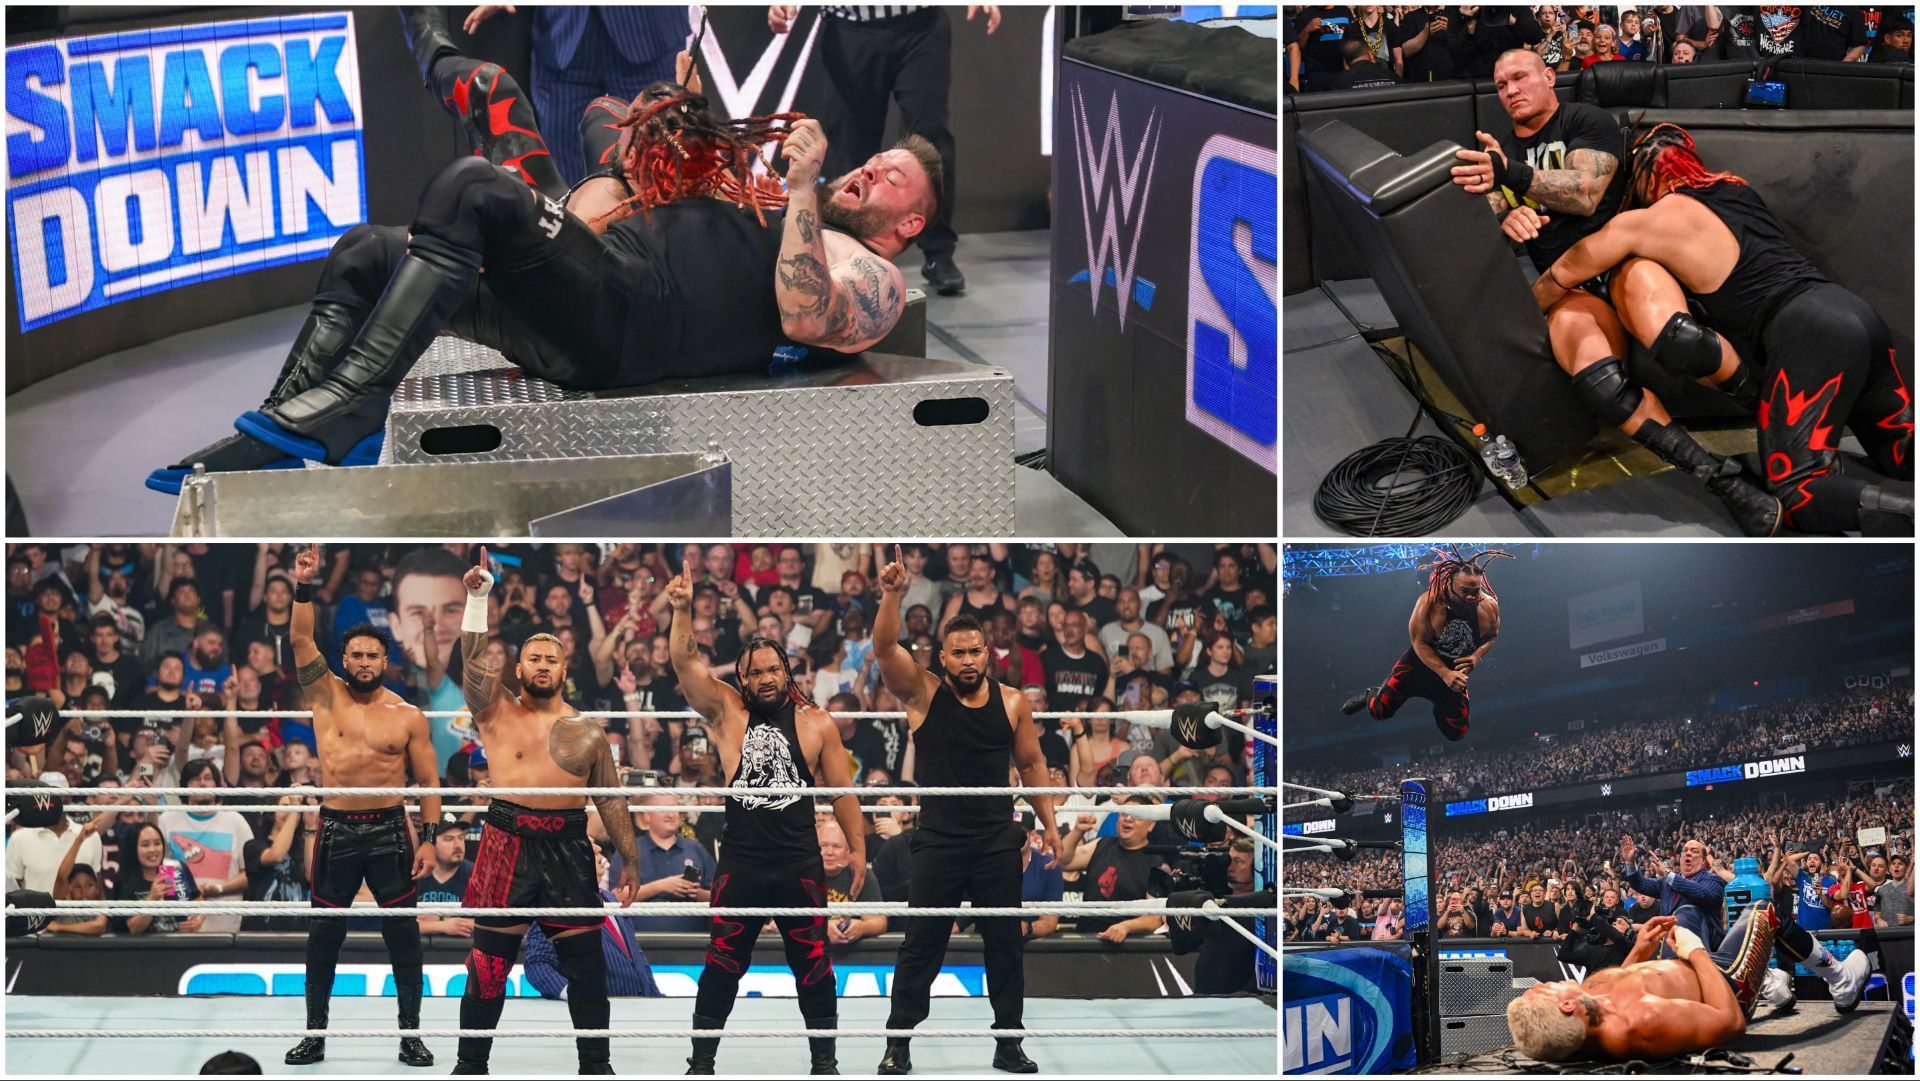 Jacob Fatu debuts with The Bloodline on WWE SmackDown